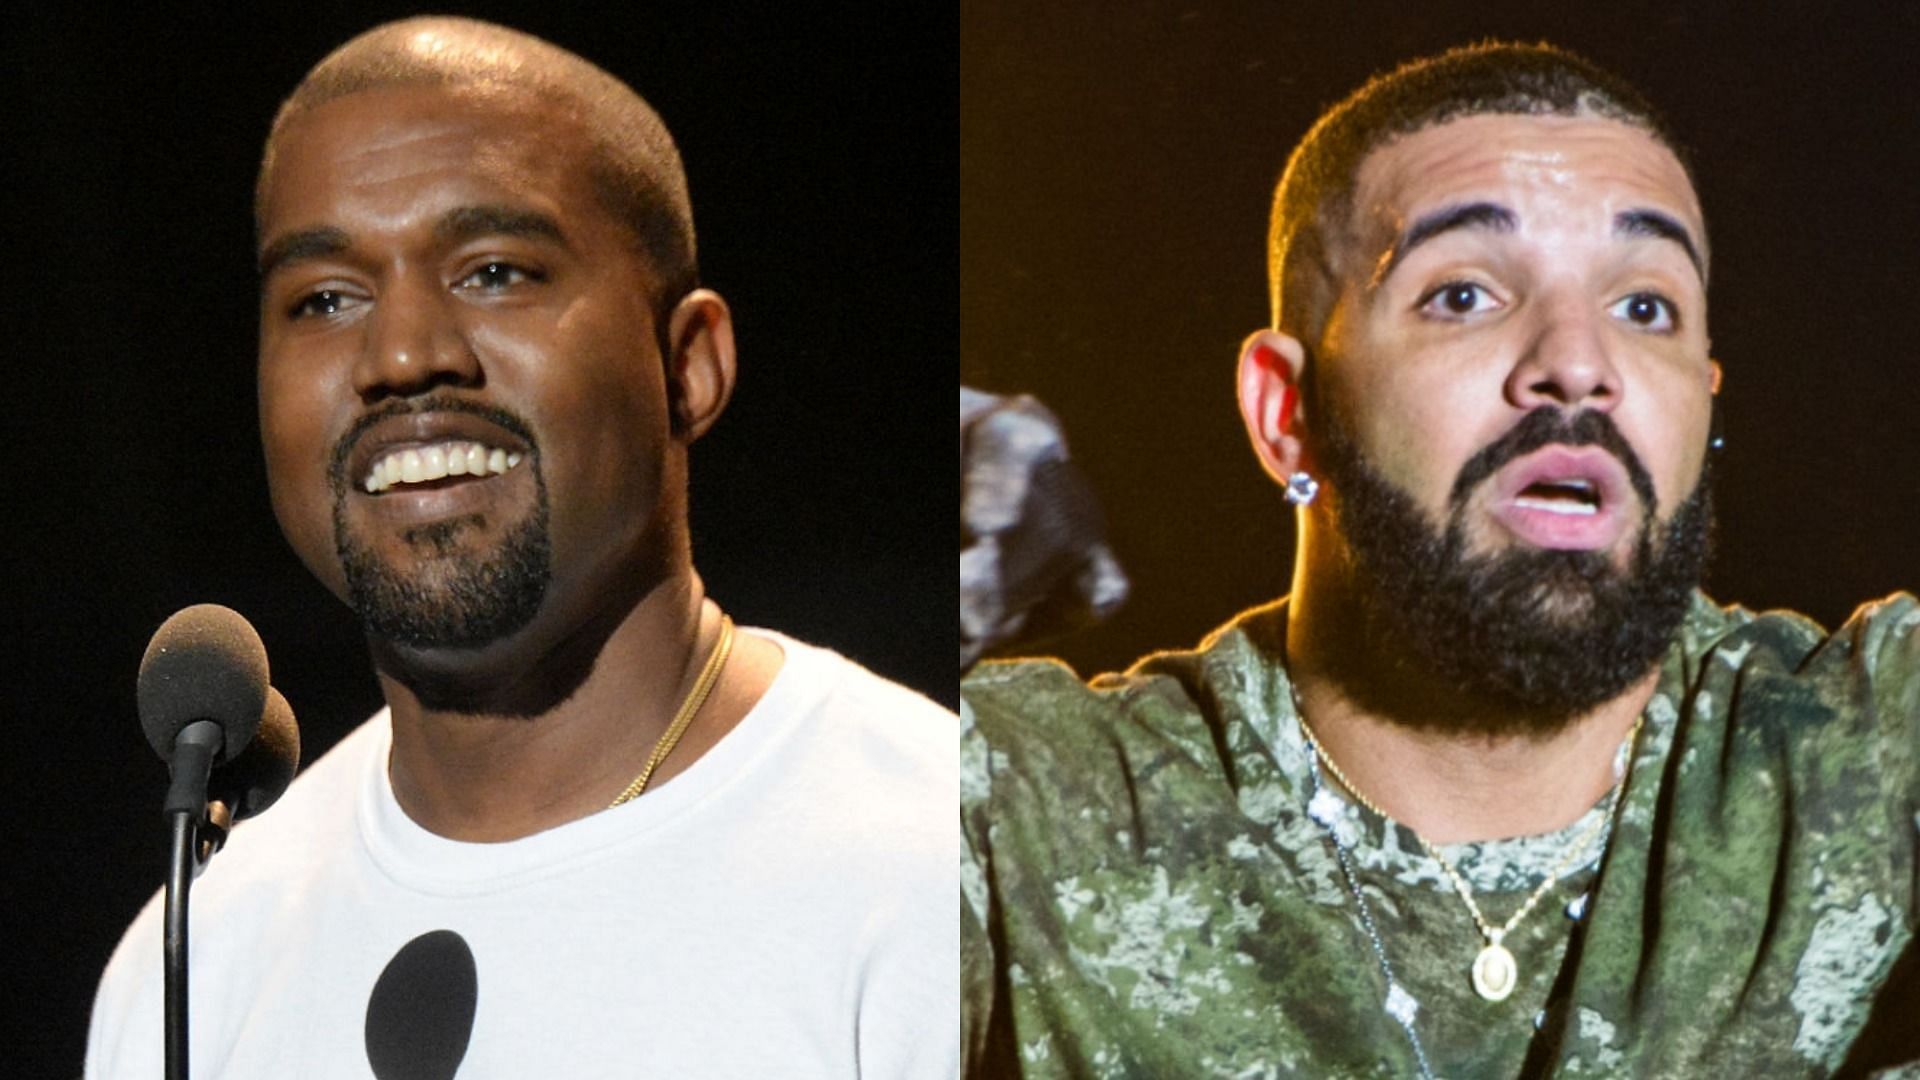 Ye and Drake came together to perform at the Free Larry Hoover concert (Image via Jeff Kravitz/Getty Images and Joseph Okpako/WireImage)